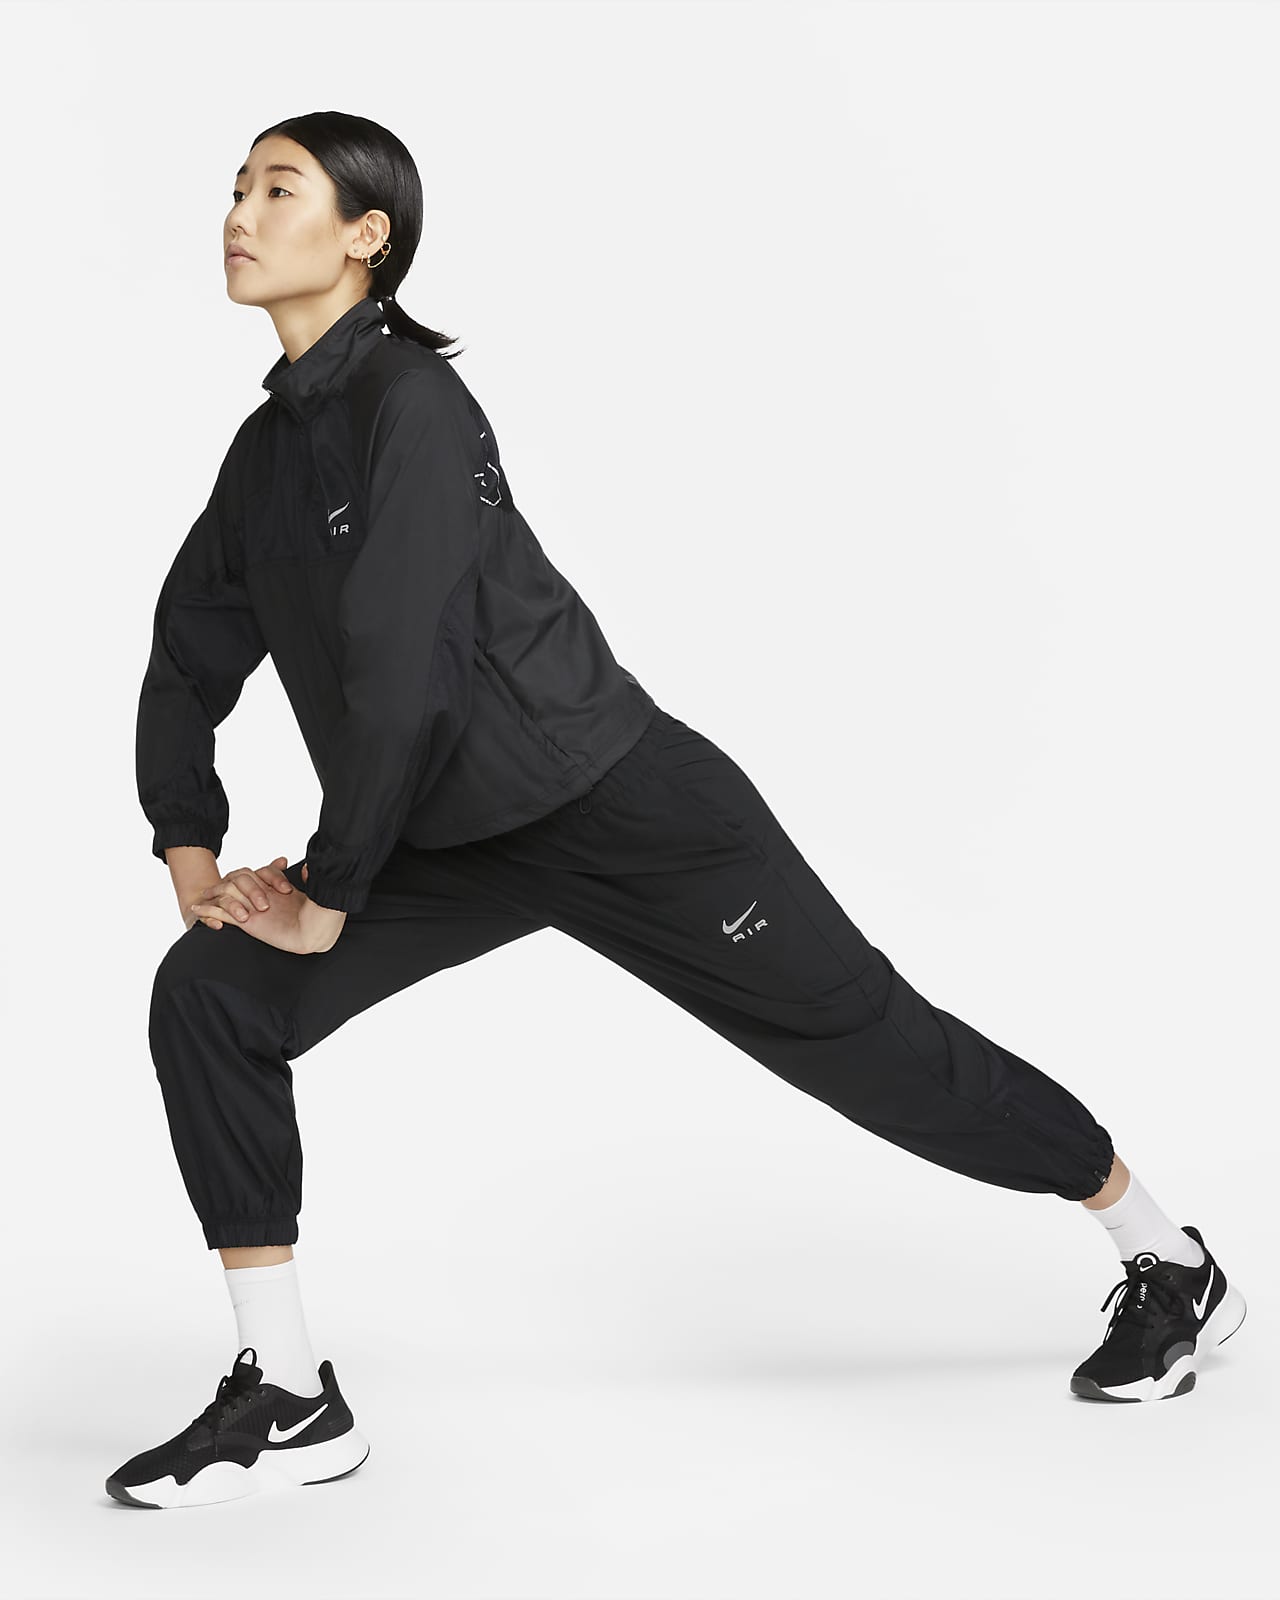 https://static.nike.com/a/images/t_PDP_1280_v1/f_auto,q_auto:eco/d305fa44-5c9d-46ba-826f-6136cecc350b/air-dri-fit-running-trousers-zDBLPC.png